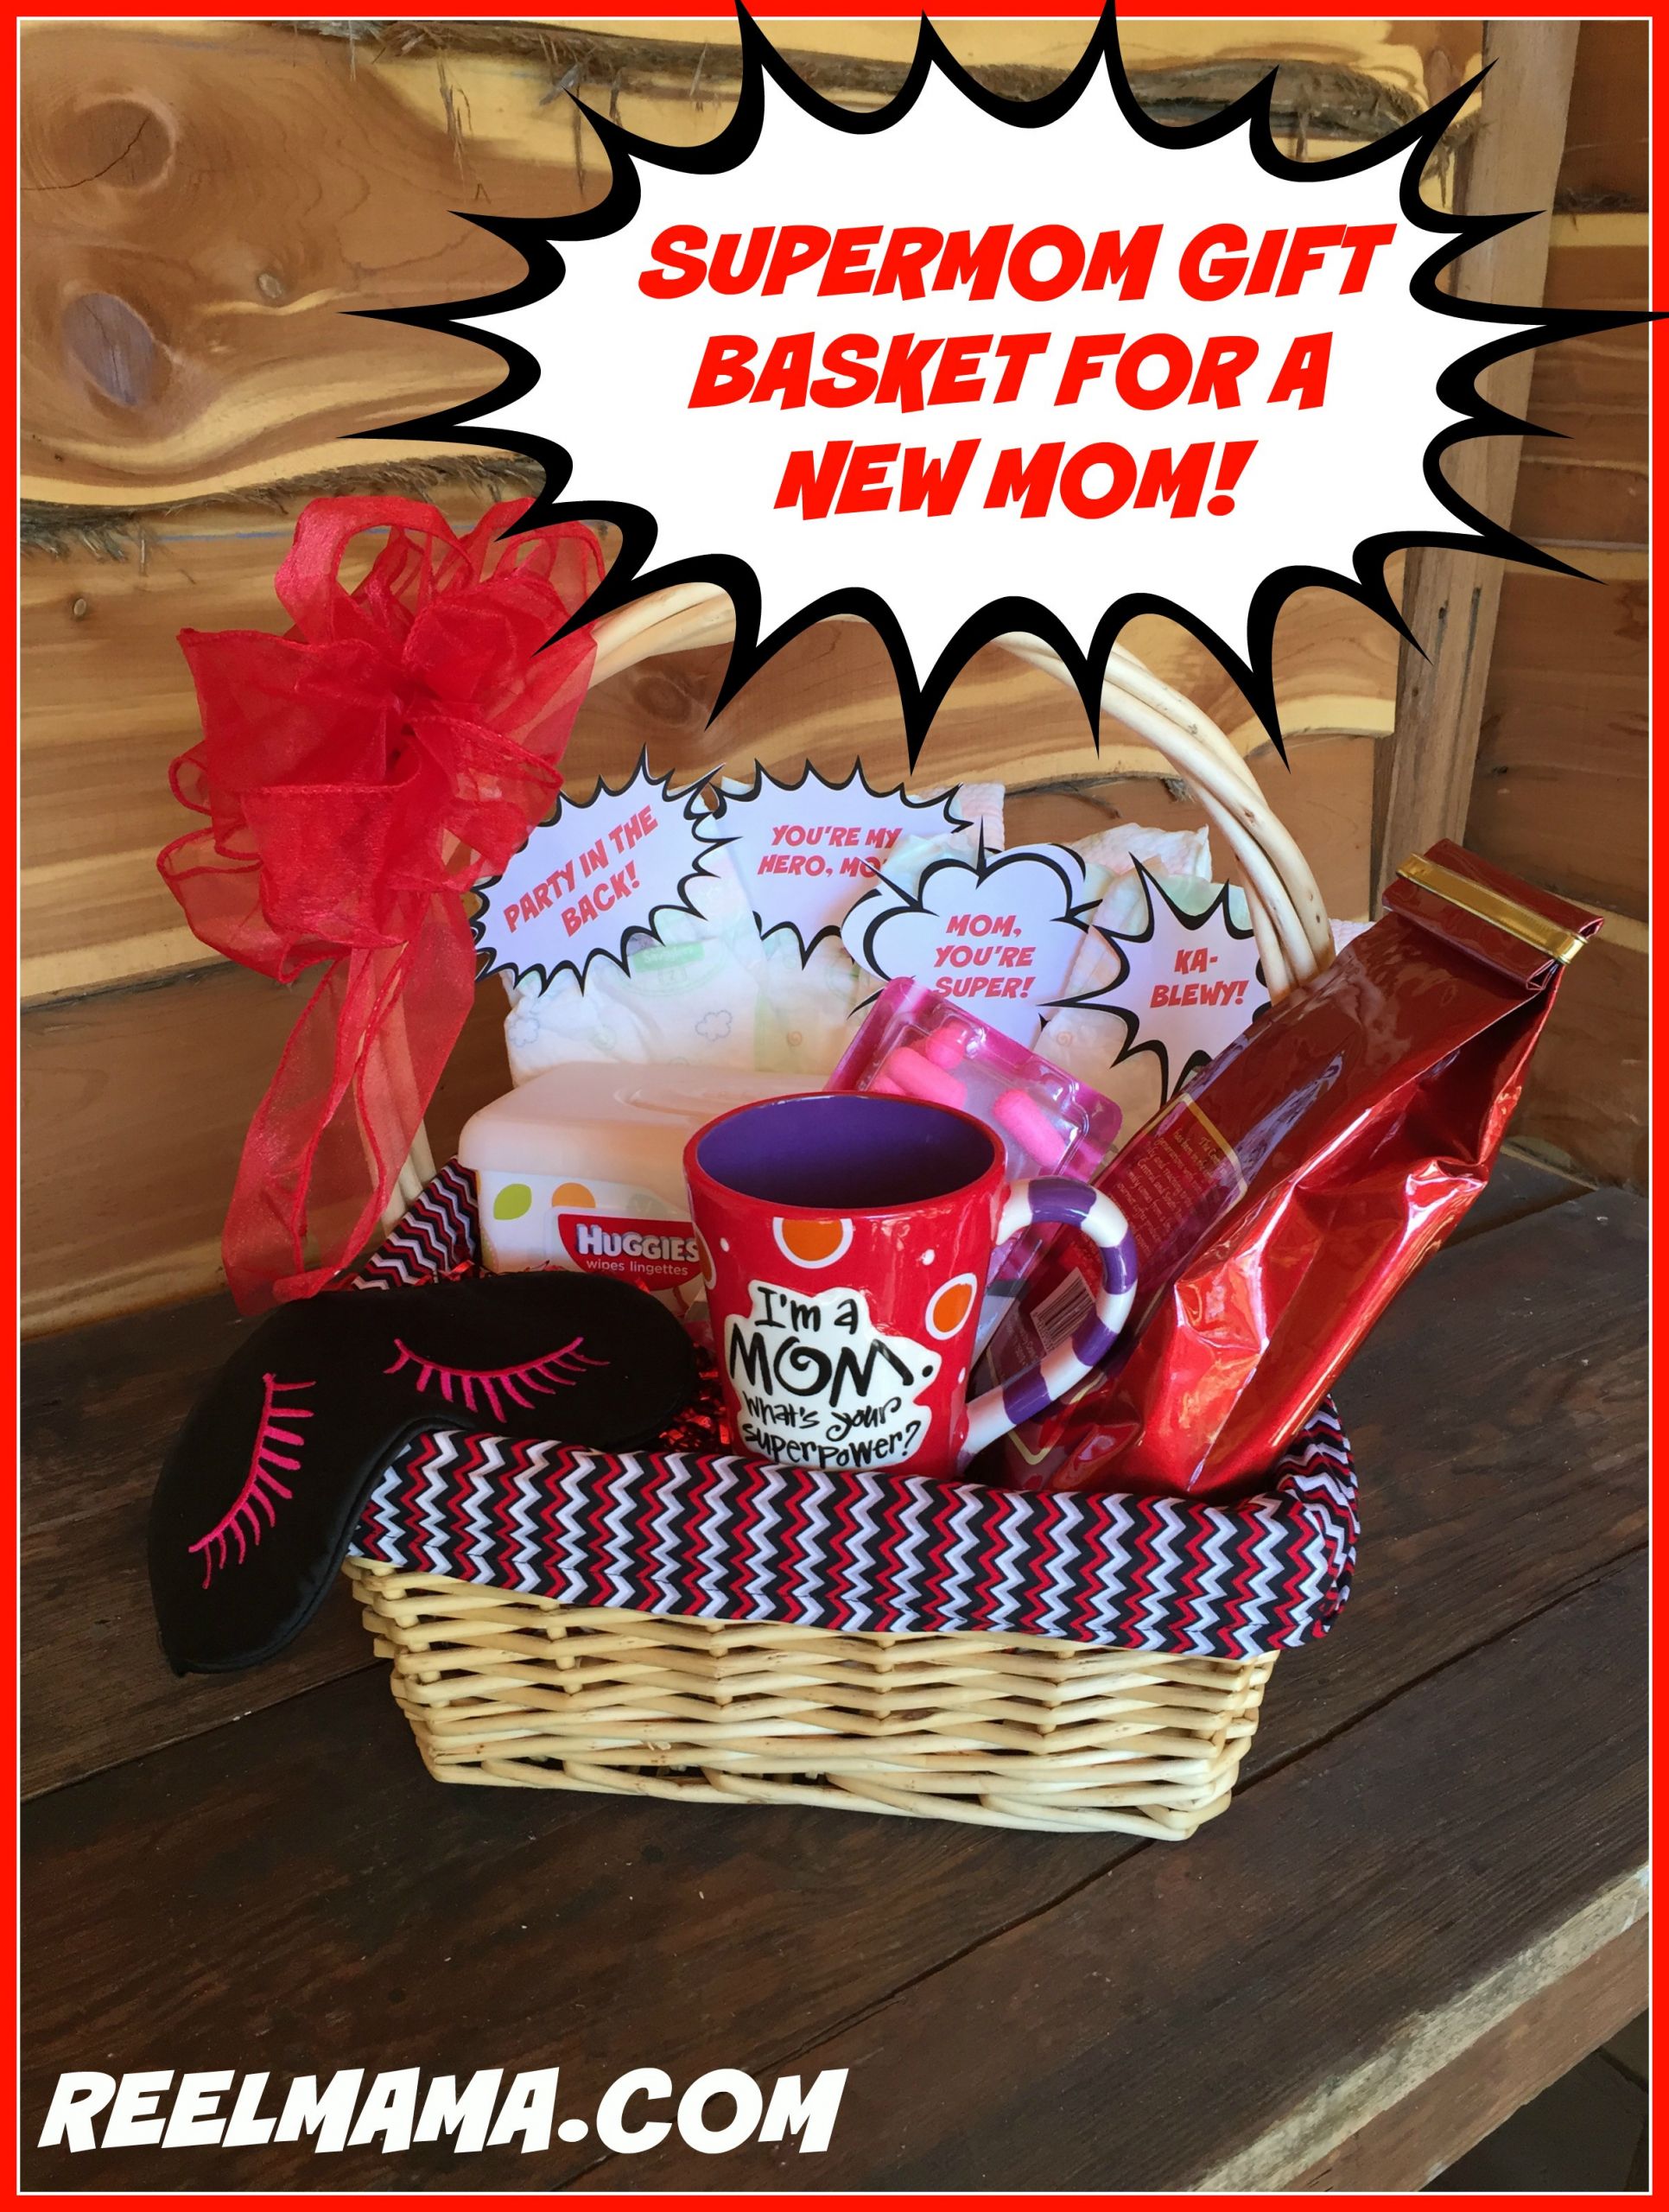 Gift Baskets Ideas For Mom
 Supermom t basket for a new mom Reelmama